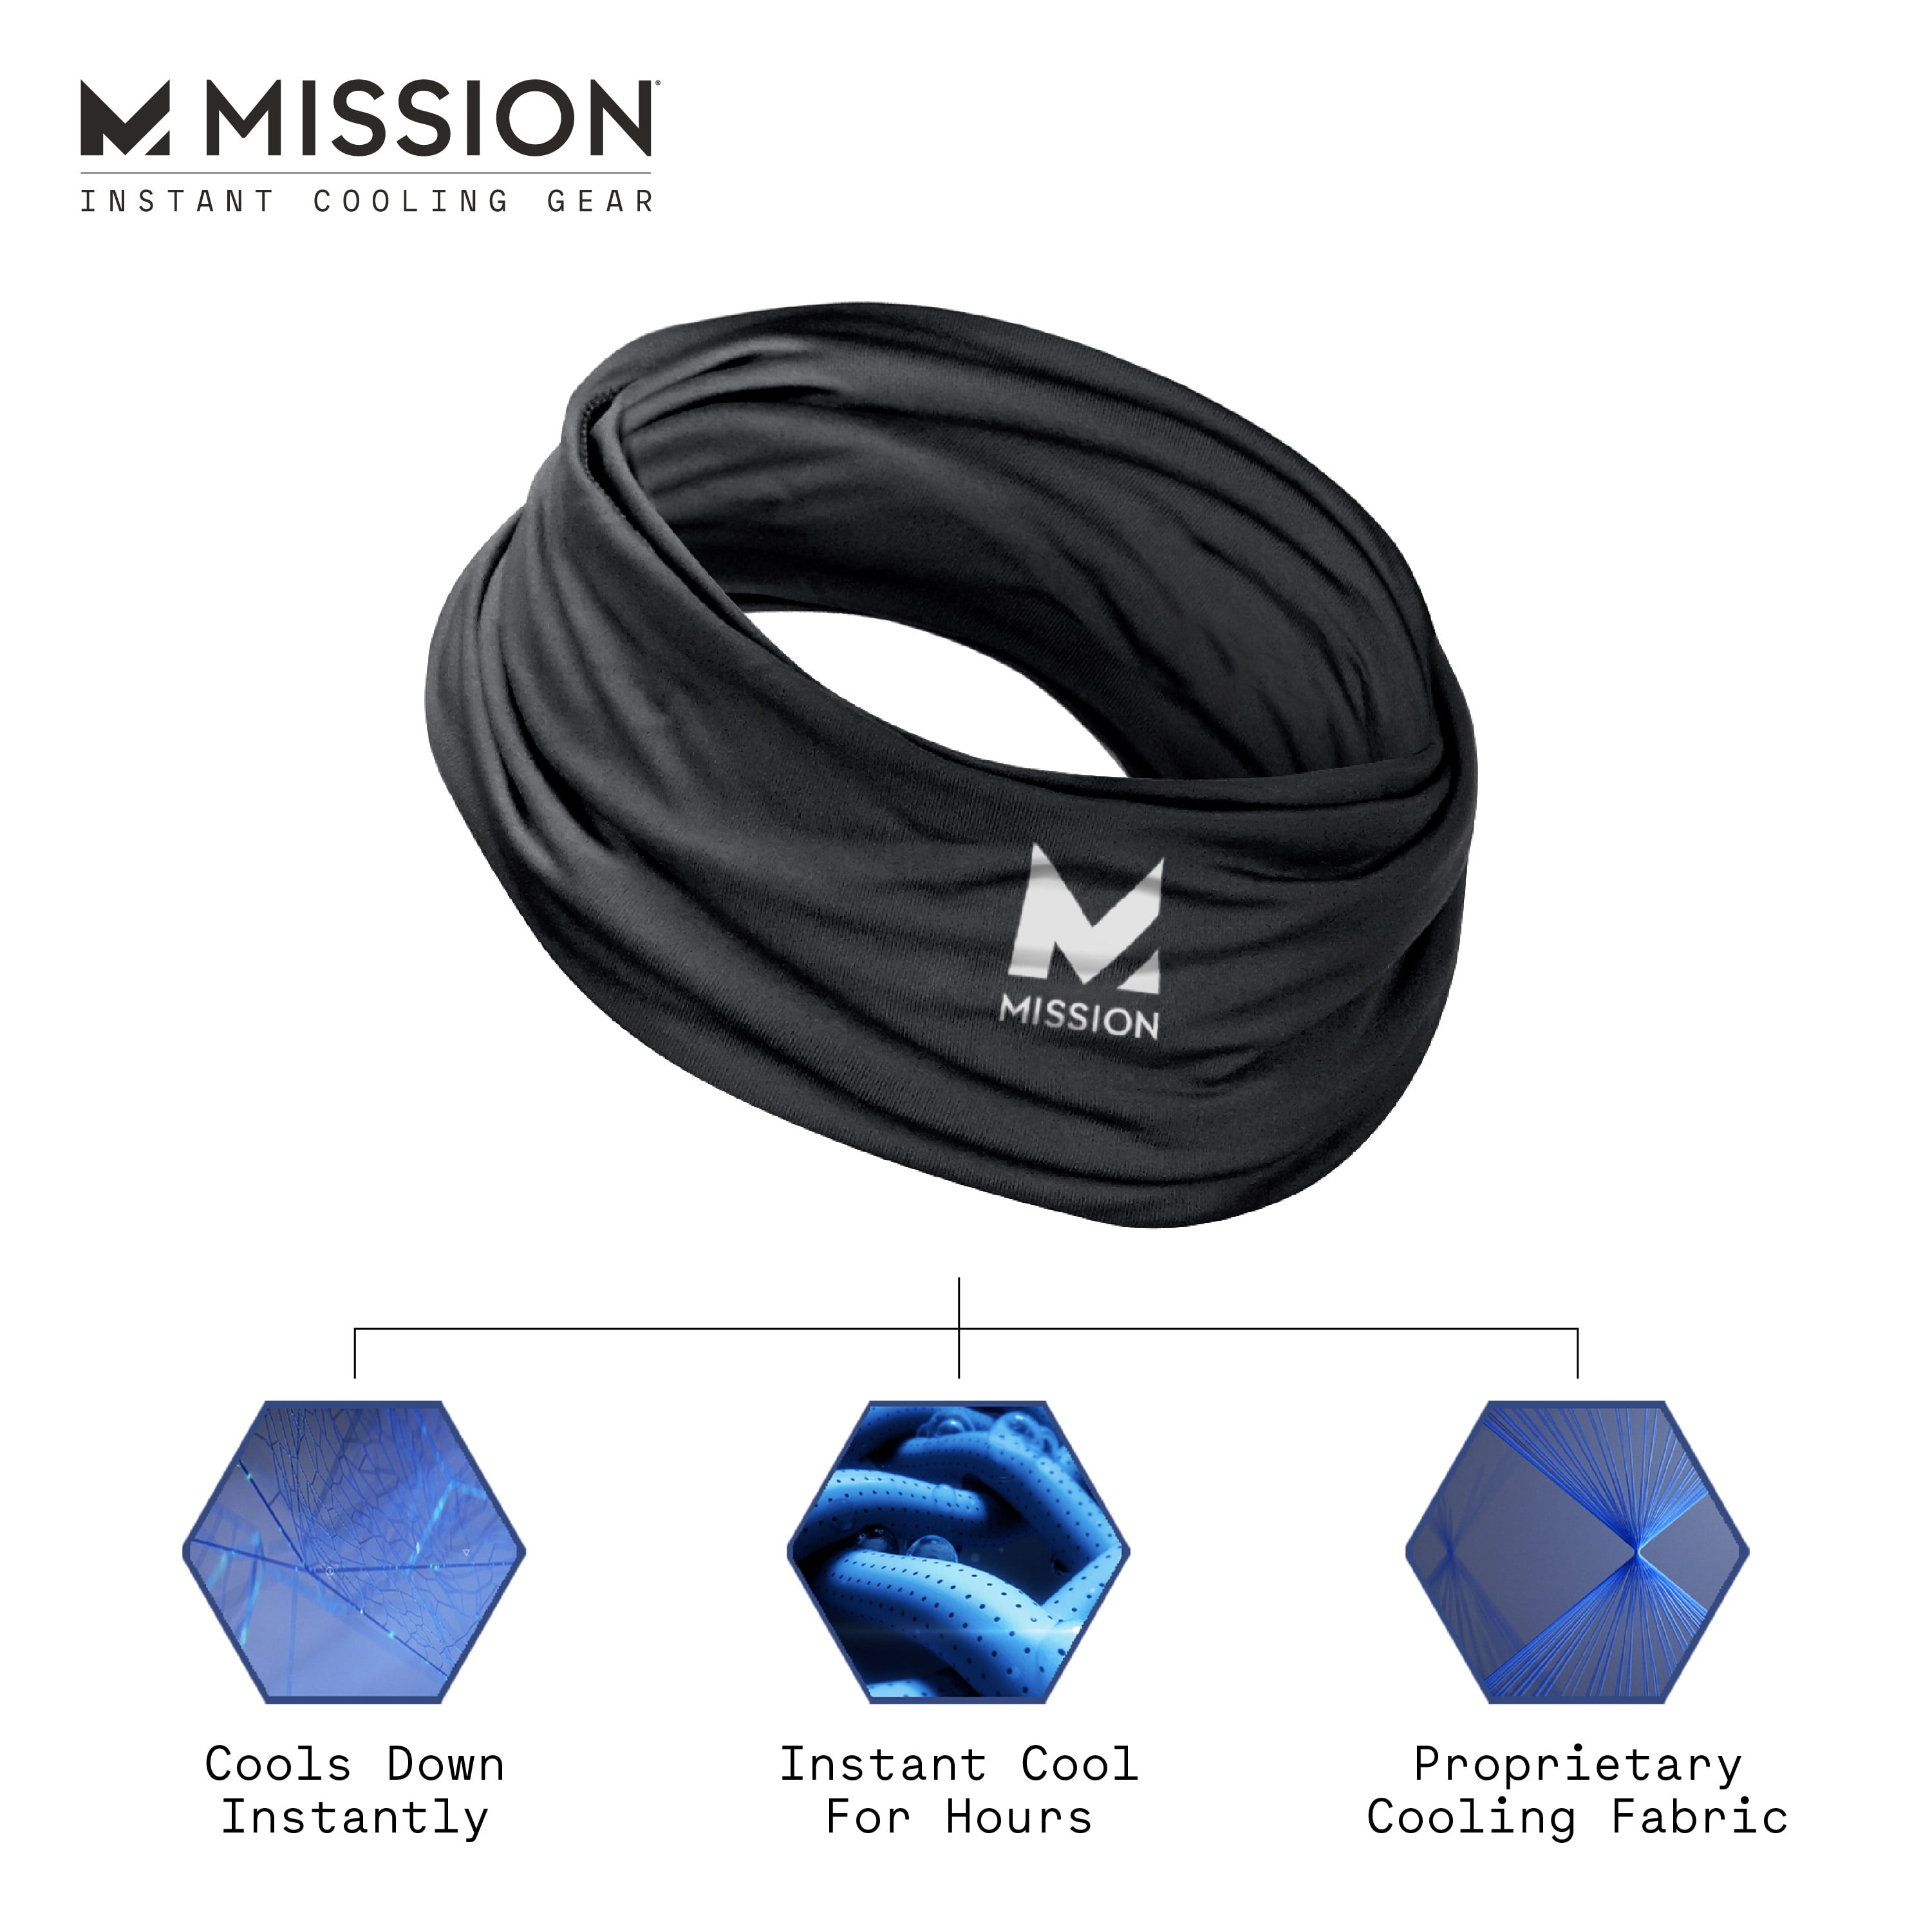 Mission 6-in-1 Cooling Gaiter Black Face Coverage Unisex